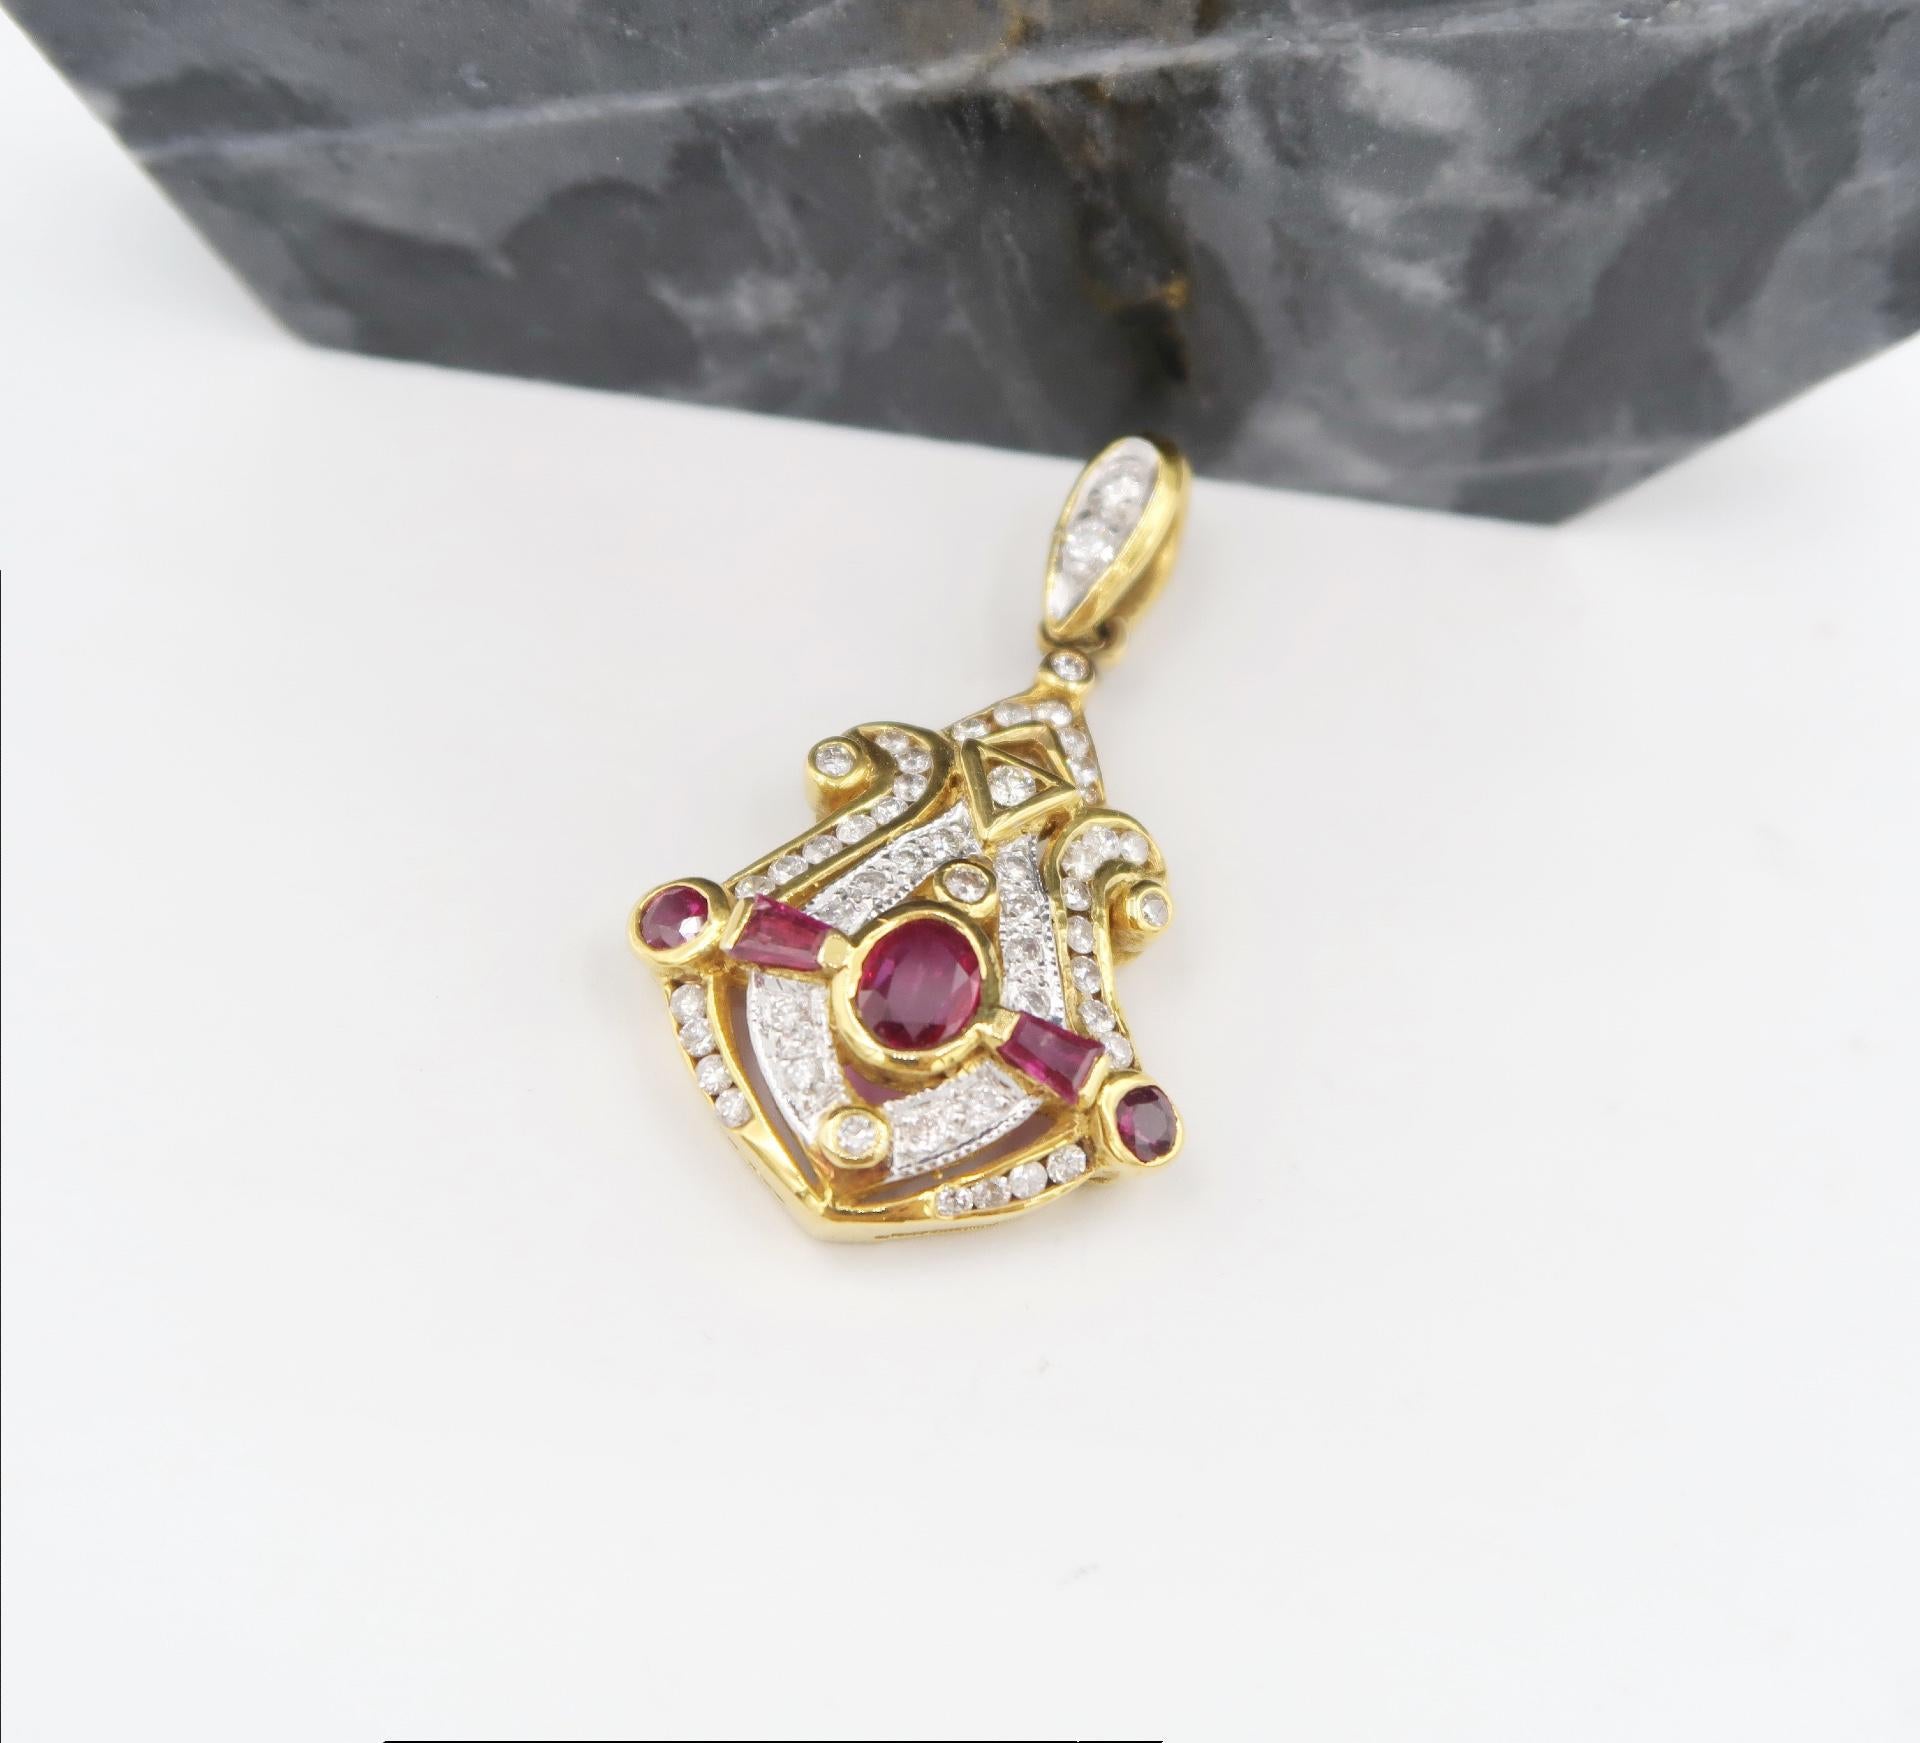 DIMENSIONS

Nautical Ruby and Diamond Pendant in 18K Yellow Gold (Pendant Only)

Gold: 18K Yellow Gold, 8.52 g
Ruby: 1.45 ct
Diamond: 0.82 ct

Please let us know should you wish to have an 18K Yellow Gold Necklace to go with the pendant.